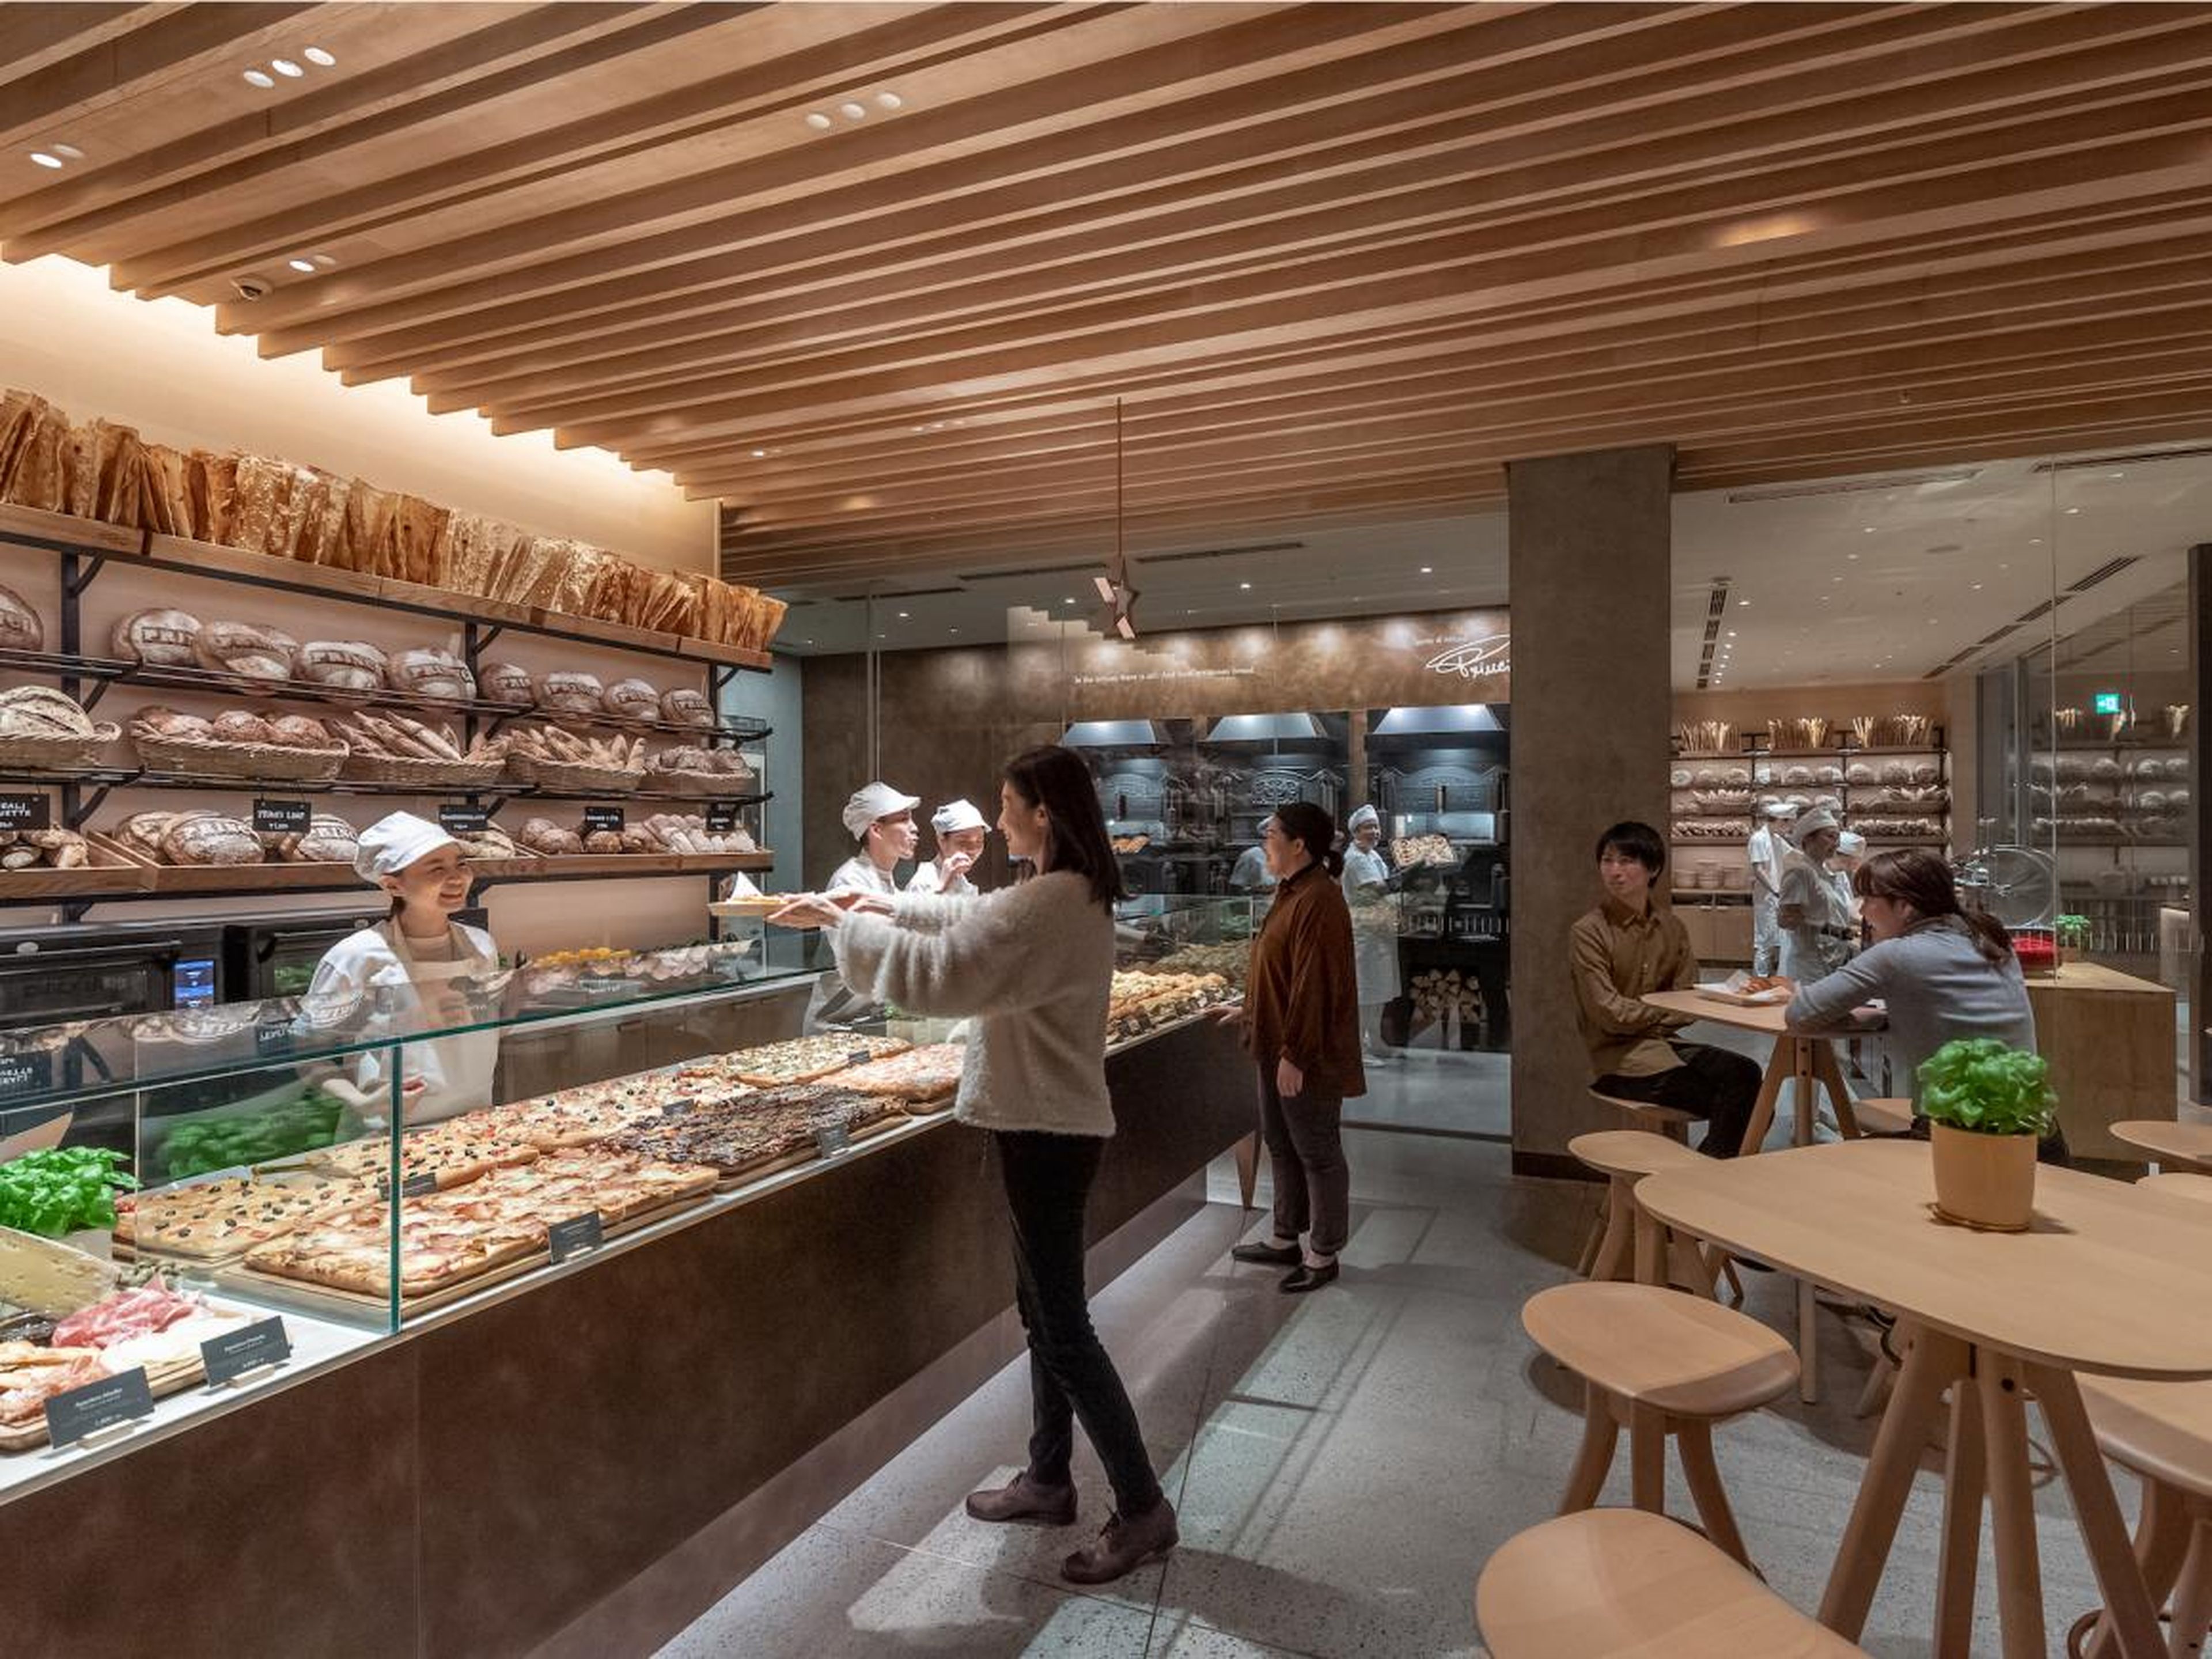 Like other Roasteries, the location houses a Princi bakery, serving baked breads, pizzas, salads, and more.